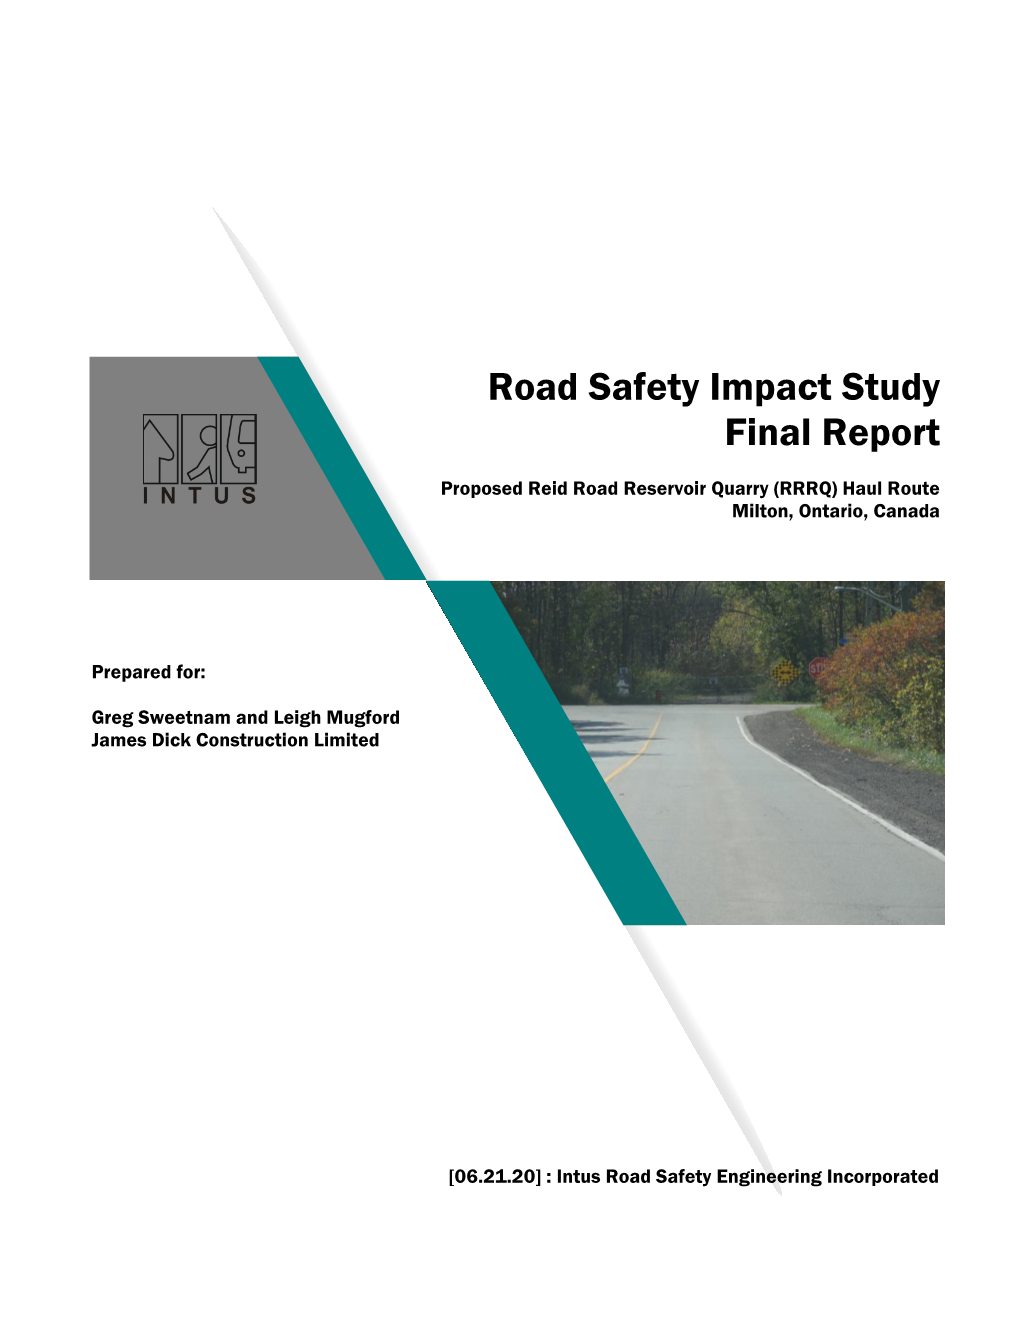 Road Safety Impact Study Final Report